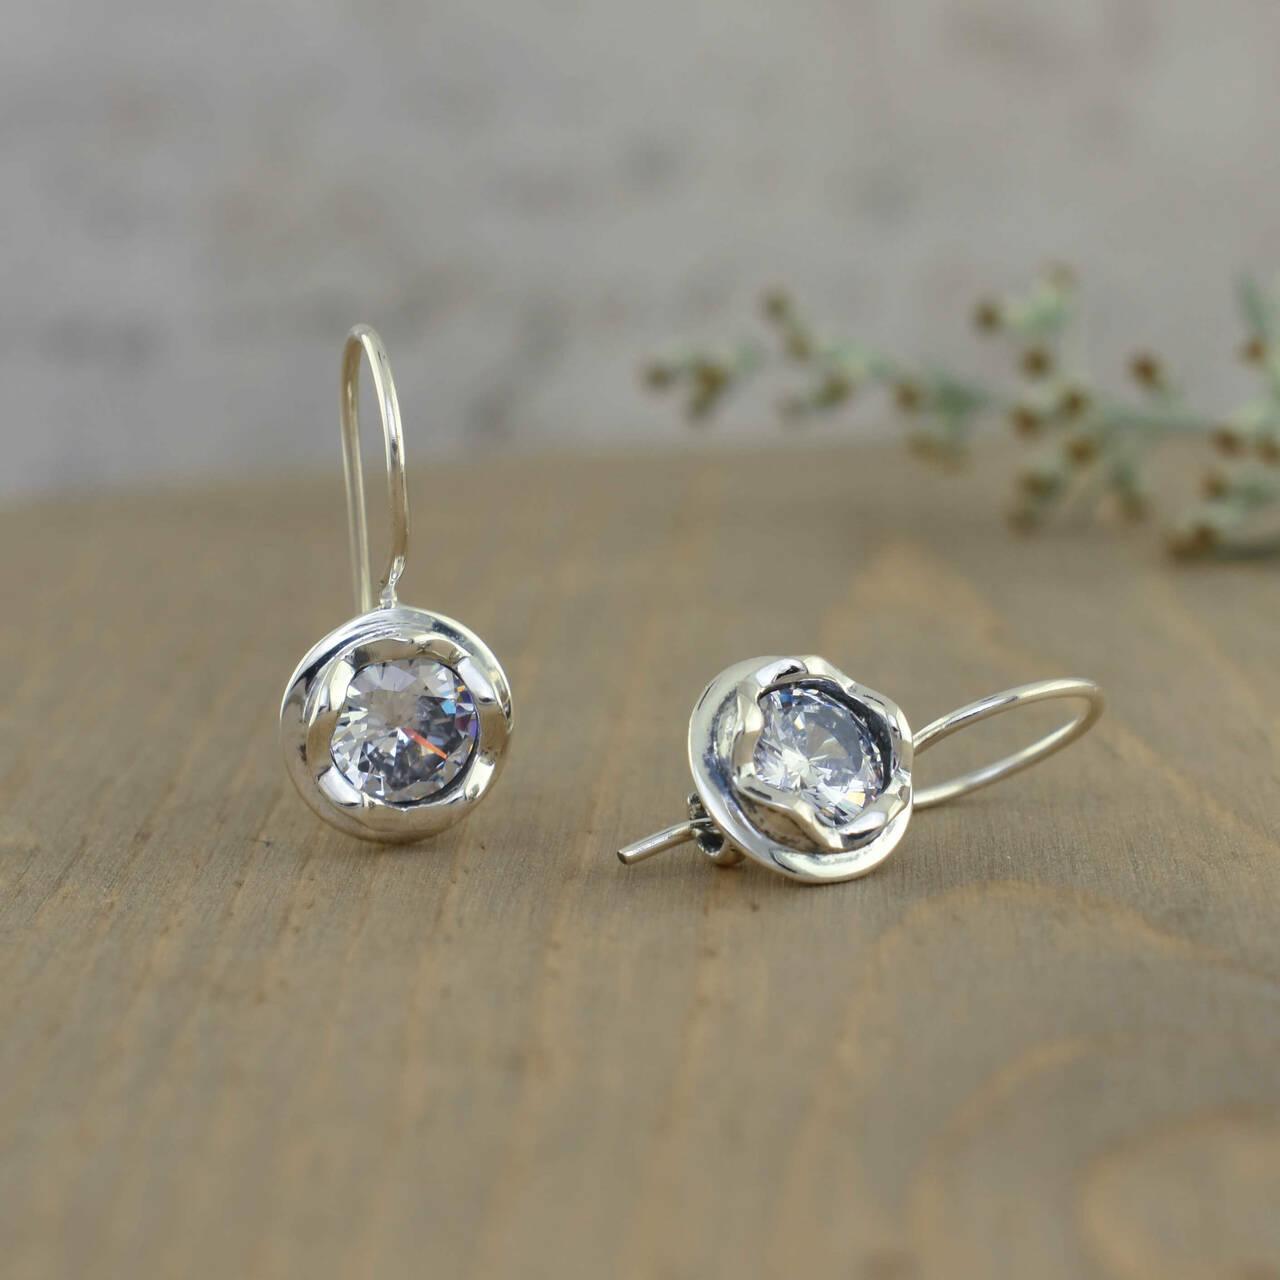 A La Mode Earrings in sterling silver and center CZ